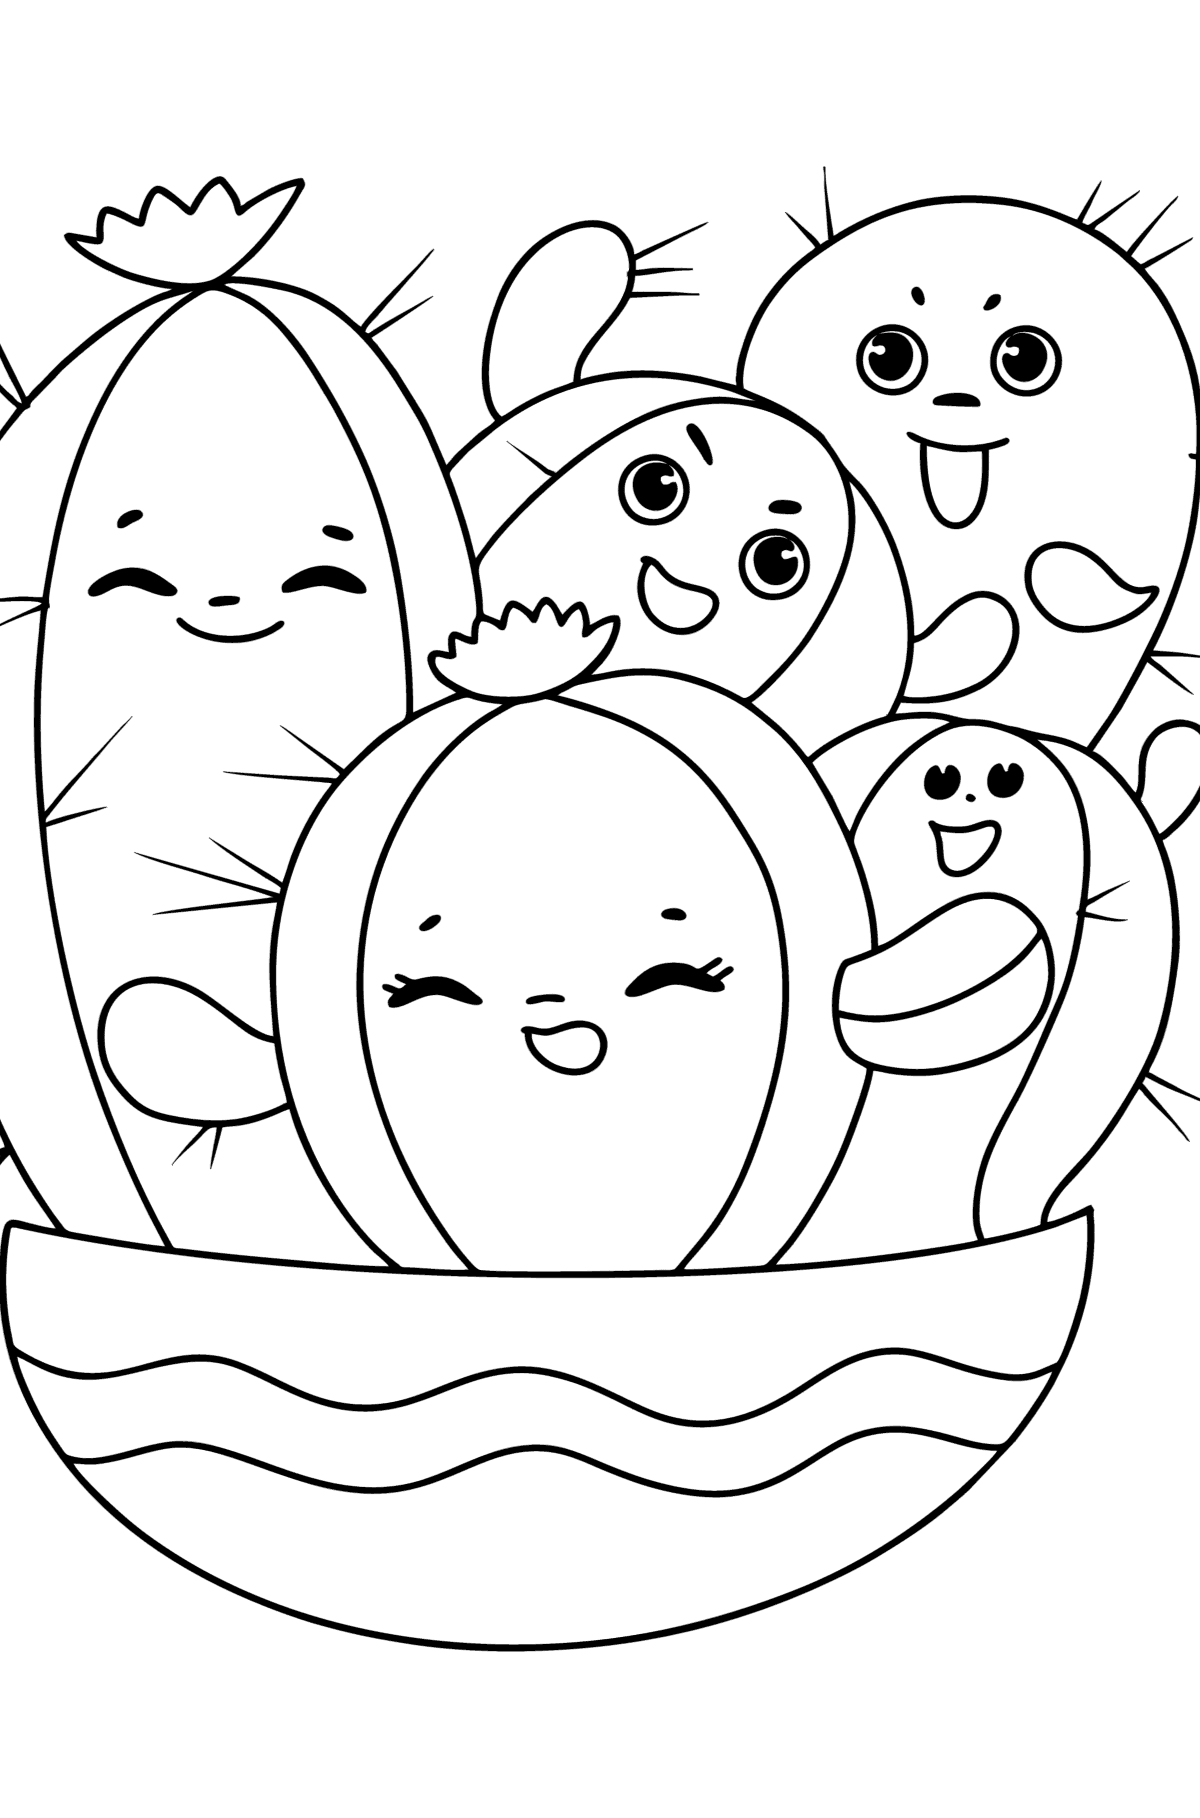 Kawaii Cactus coloring page - Coloring Pages for Kids